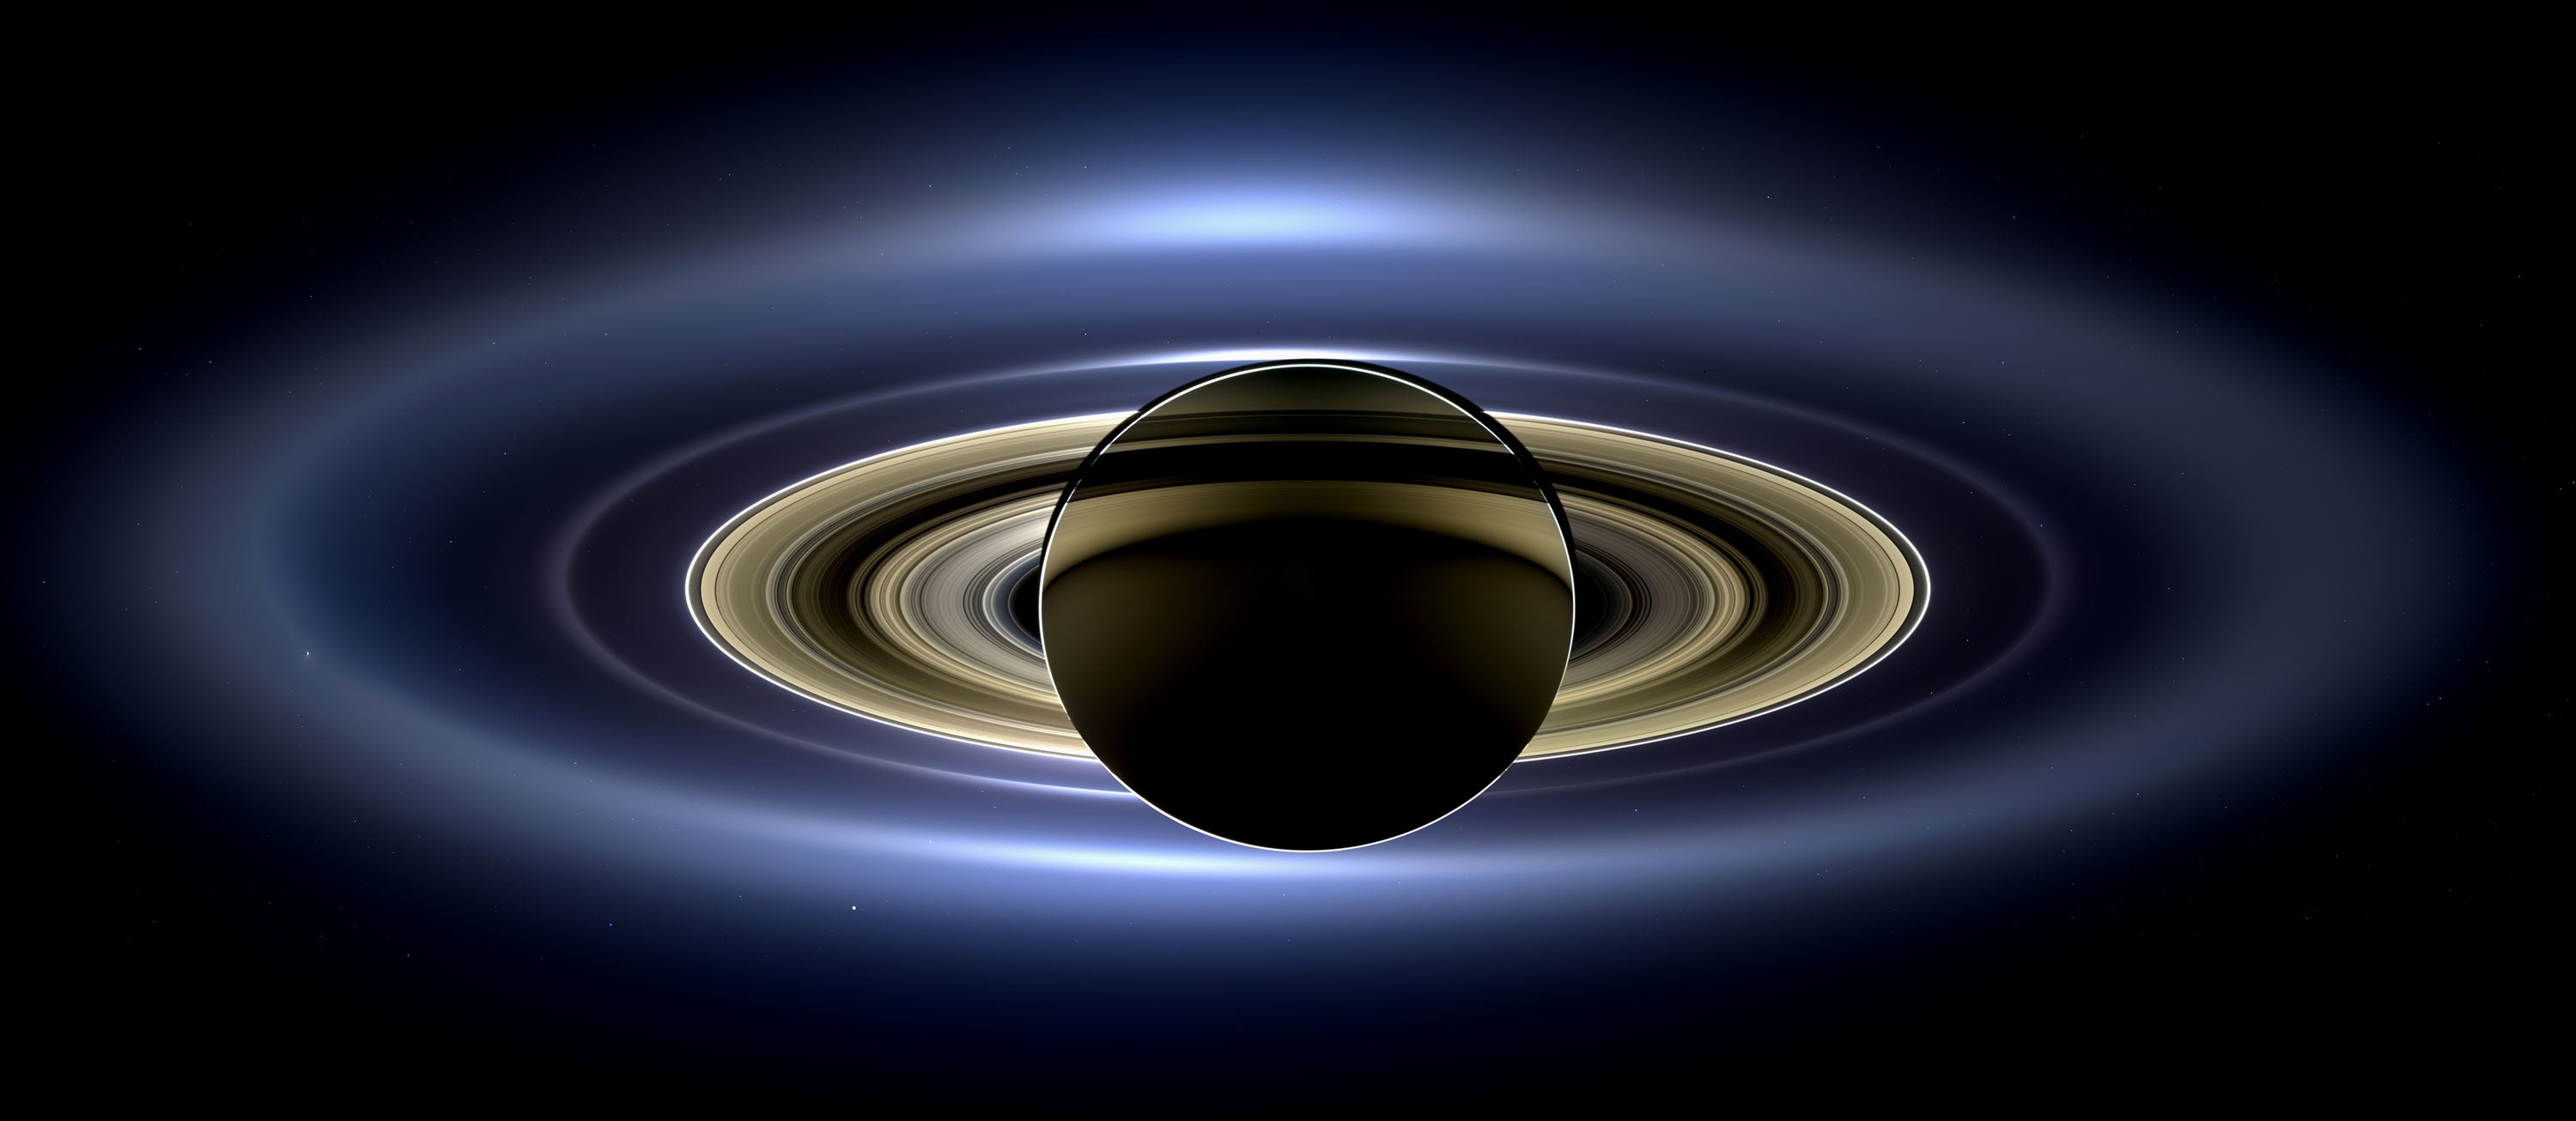 The image of Saturn taken by the Cassini spacecraft on 19 July.